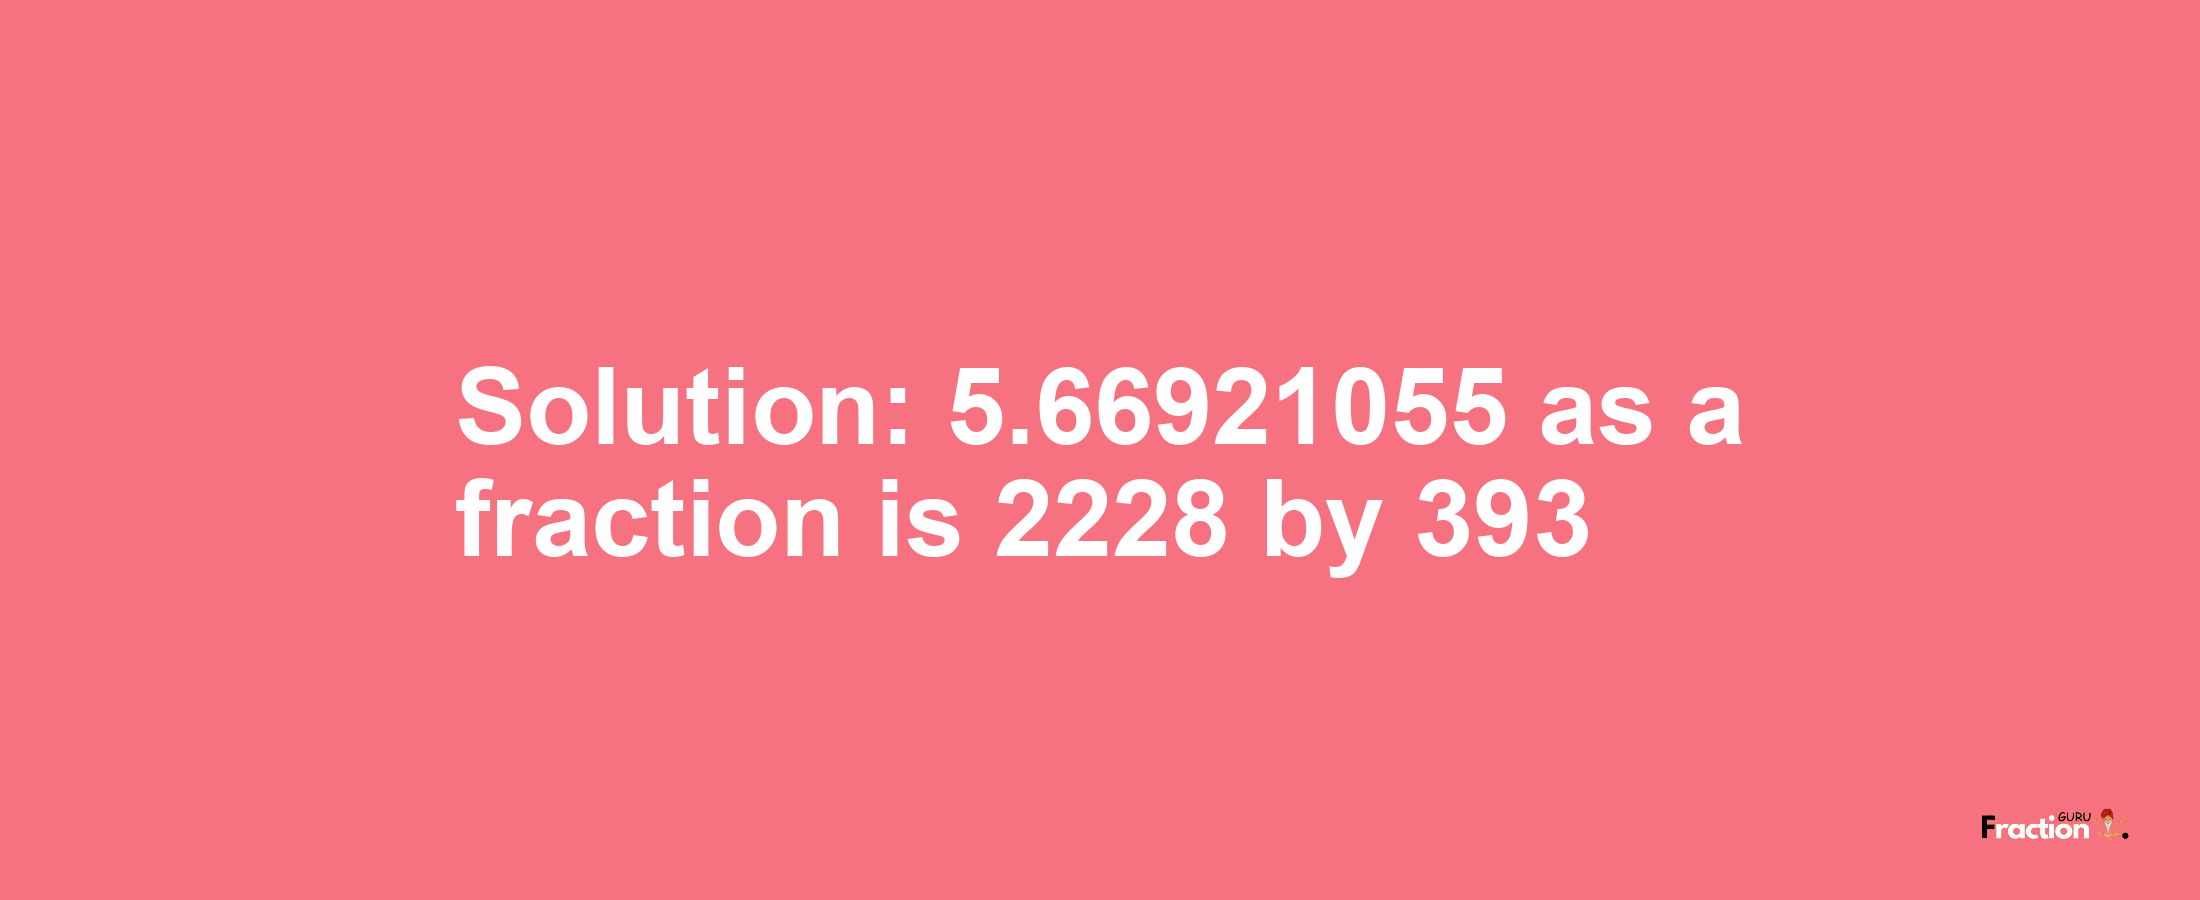 Solution:5.66921055 as a fraction is 2228/393